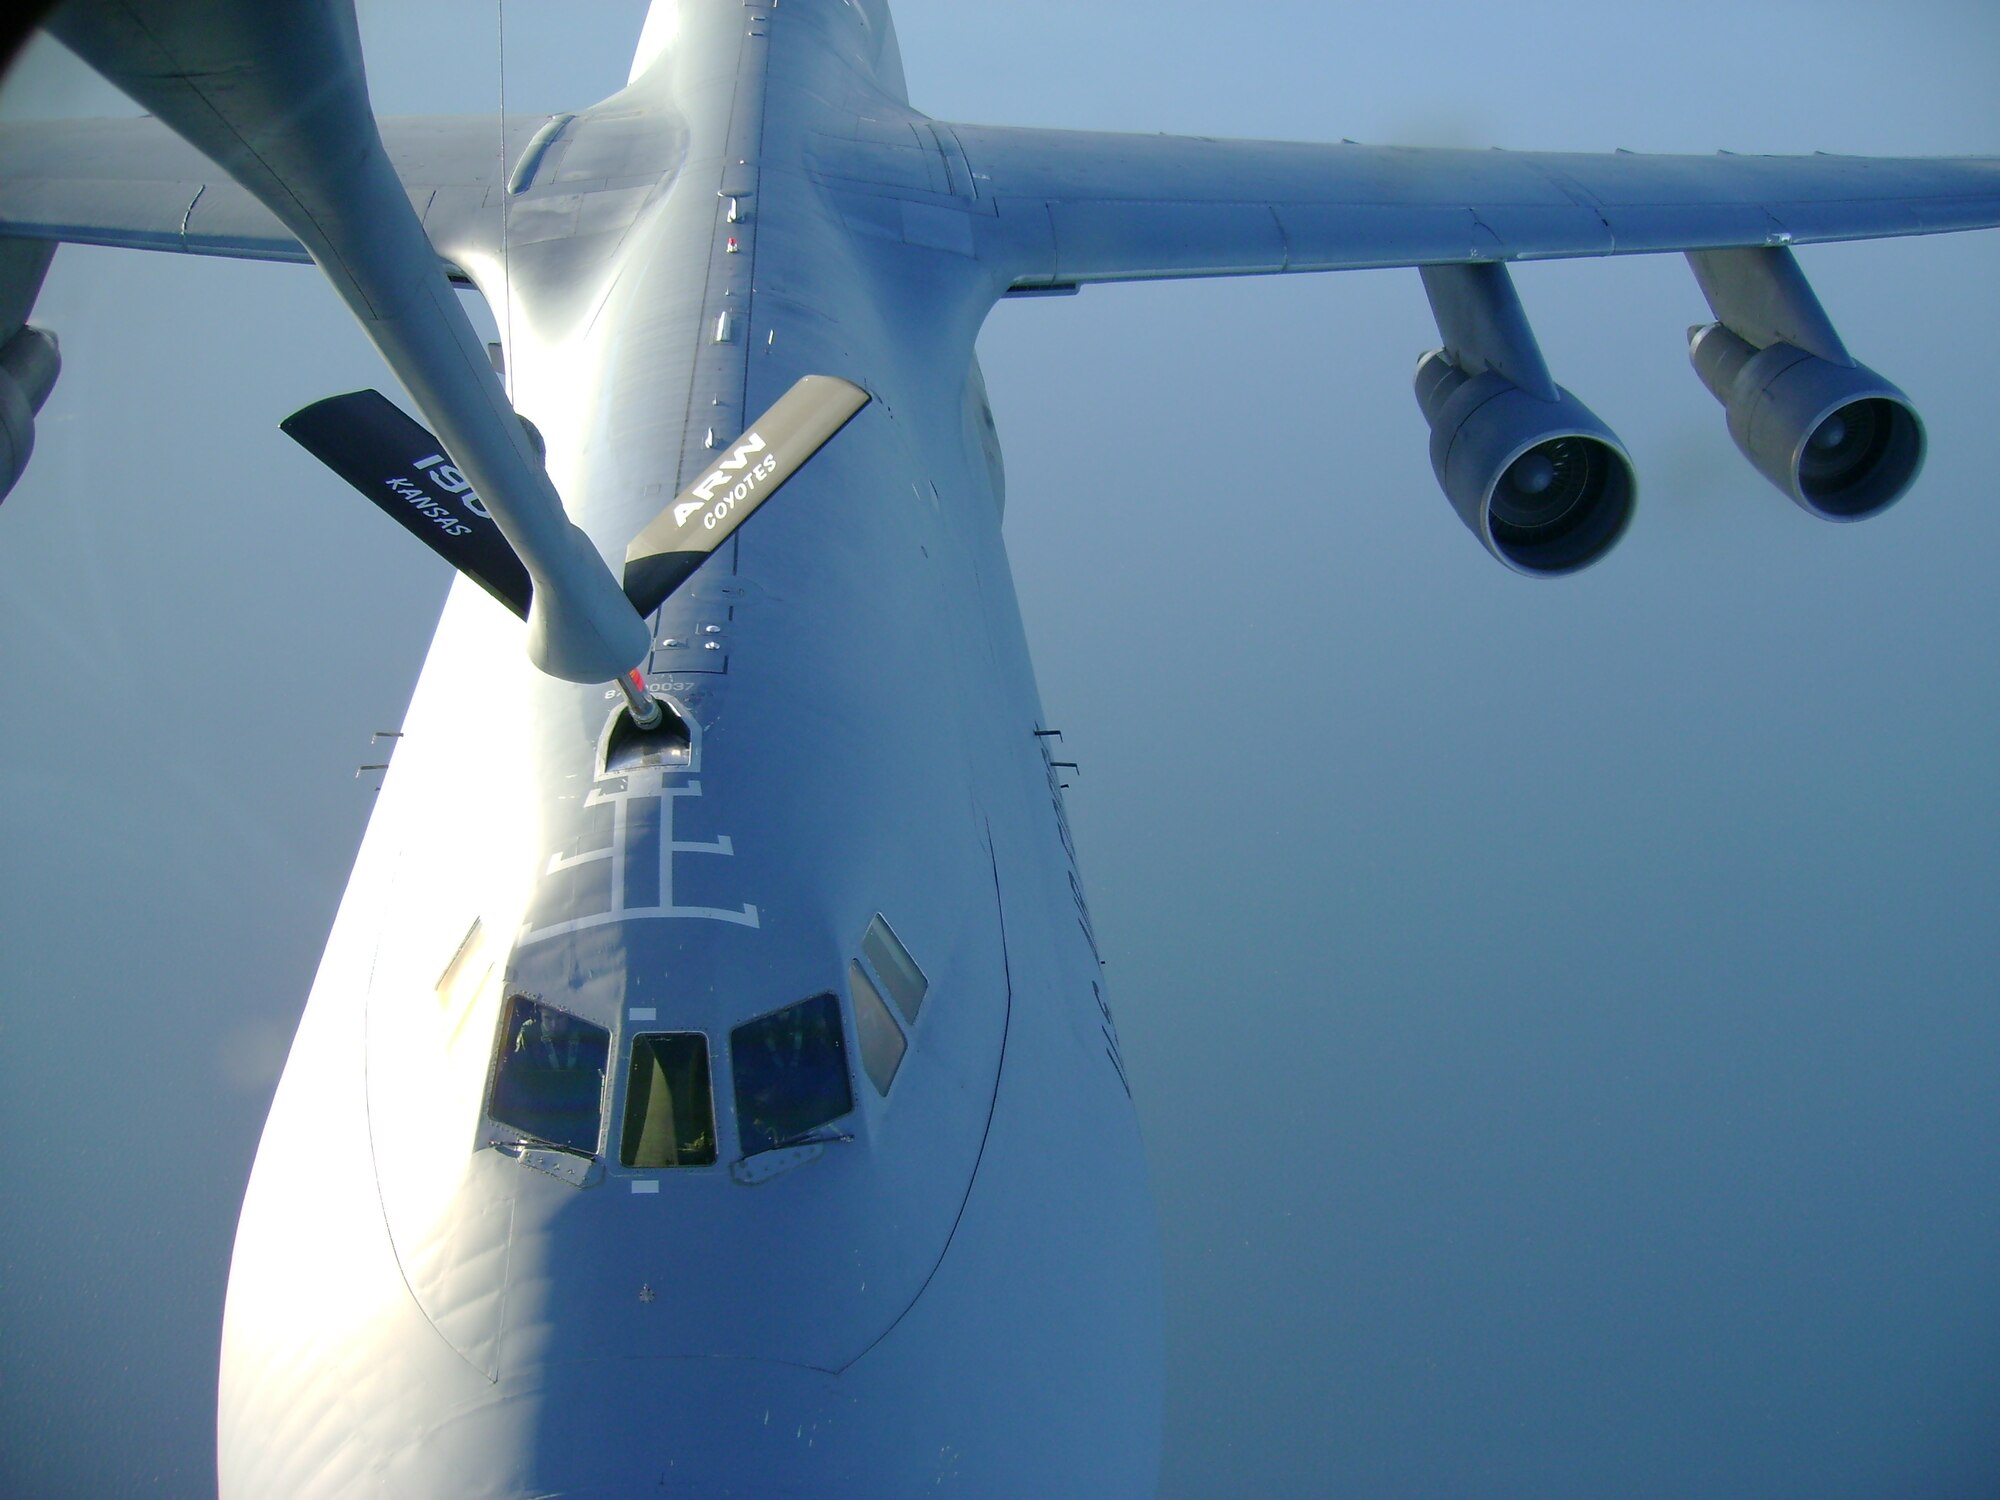 Chief Master Sgt. Tim Trienen (not shown) refuels a C-5 over the Black Sea during the AEF deployment to Turkey. (photo by Staff Sgt. Ken Snyder)